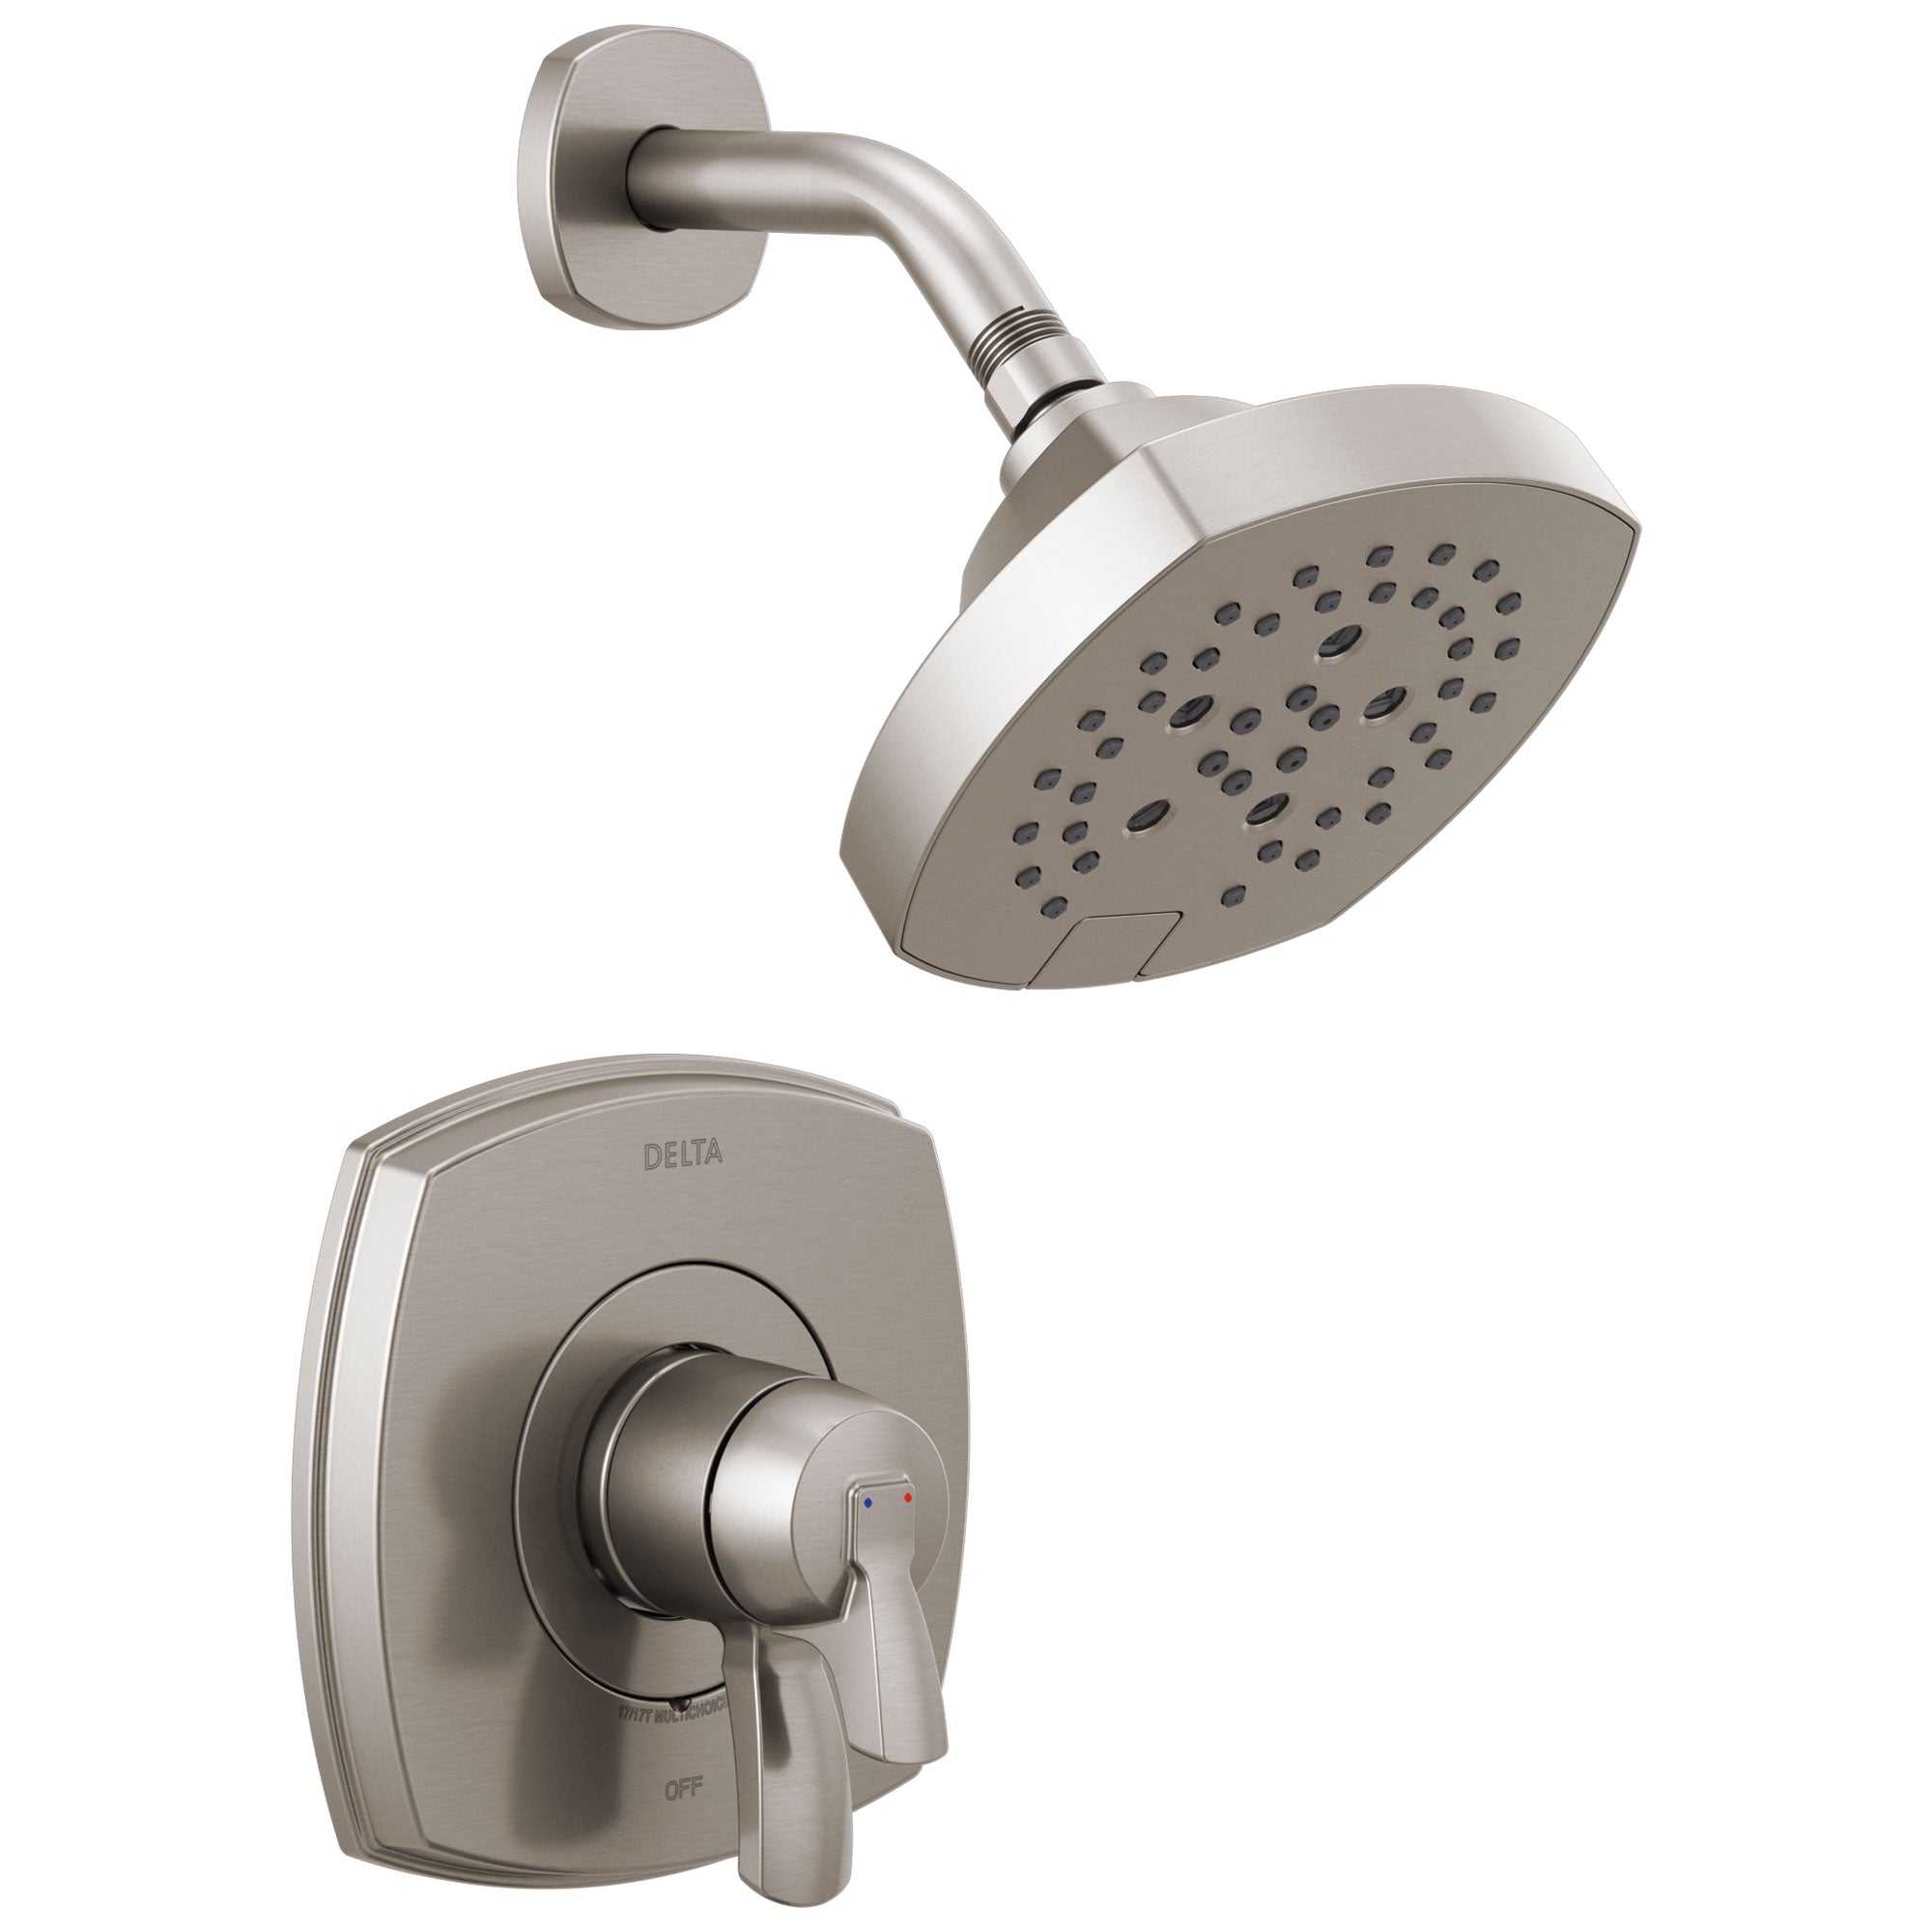 Delta Stryke Stainless Steel Finish Monitor 17 Series Shower Only Faucet Includes Handles, Cartridge, and Valve without Stops D3363V